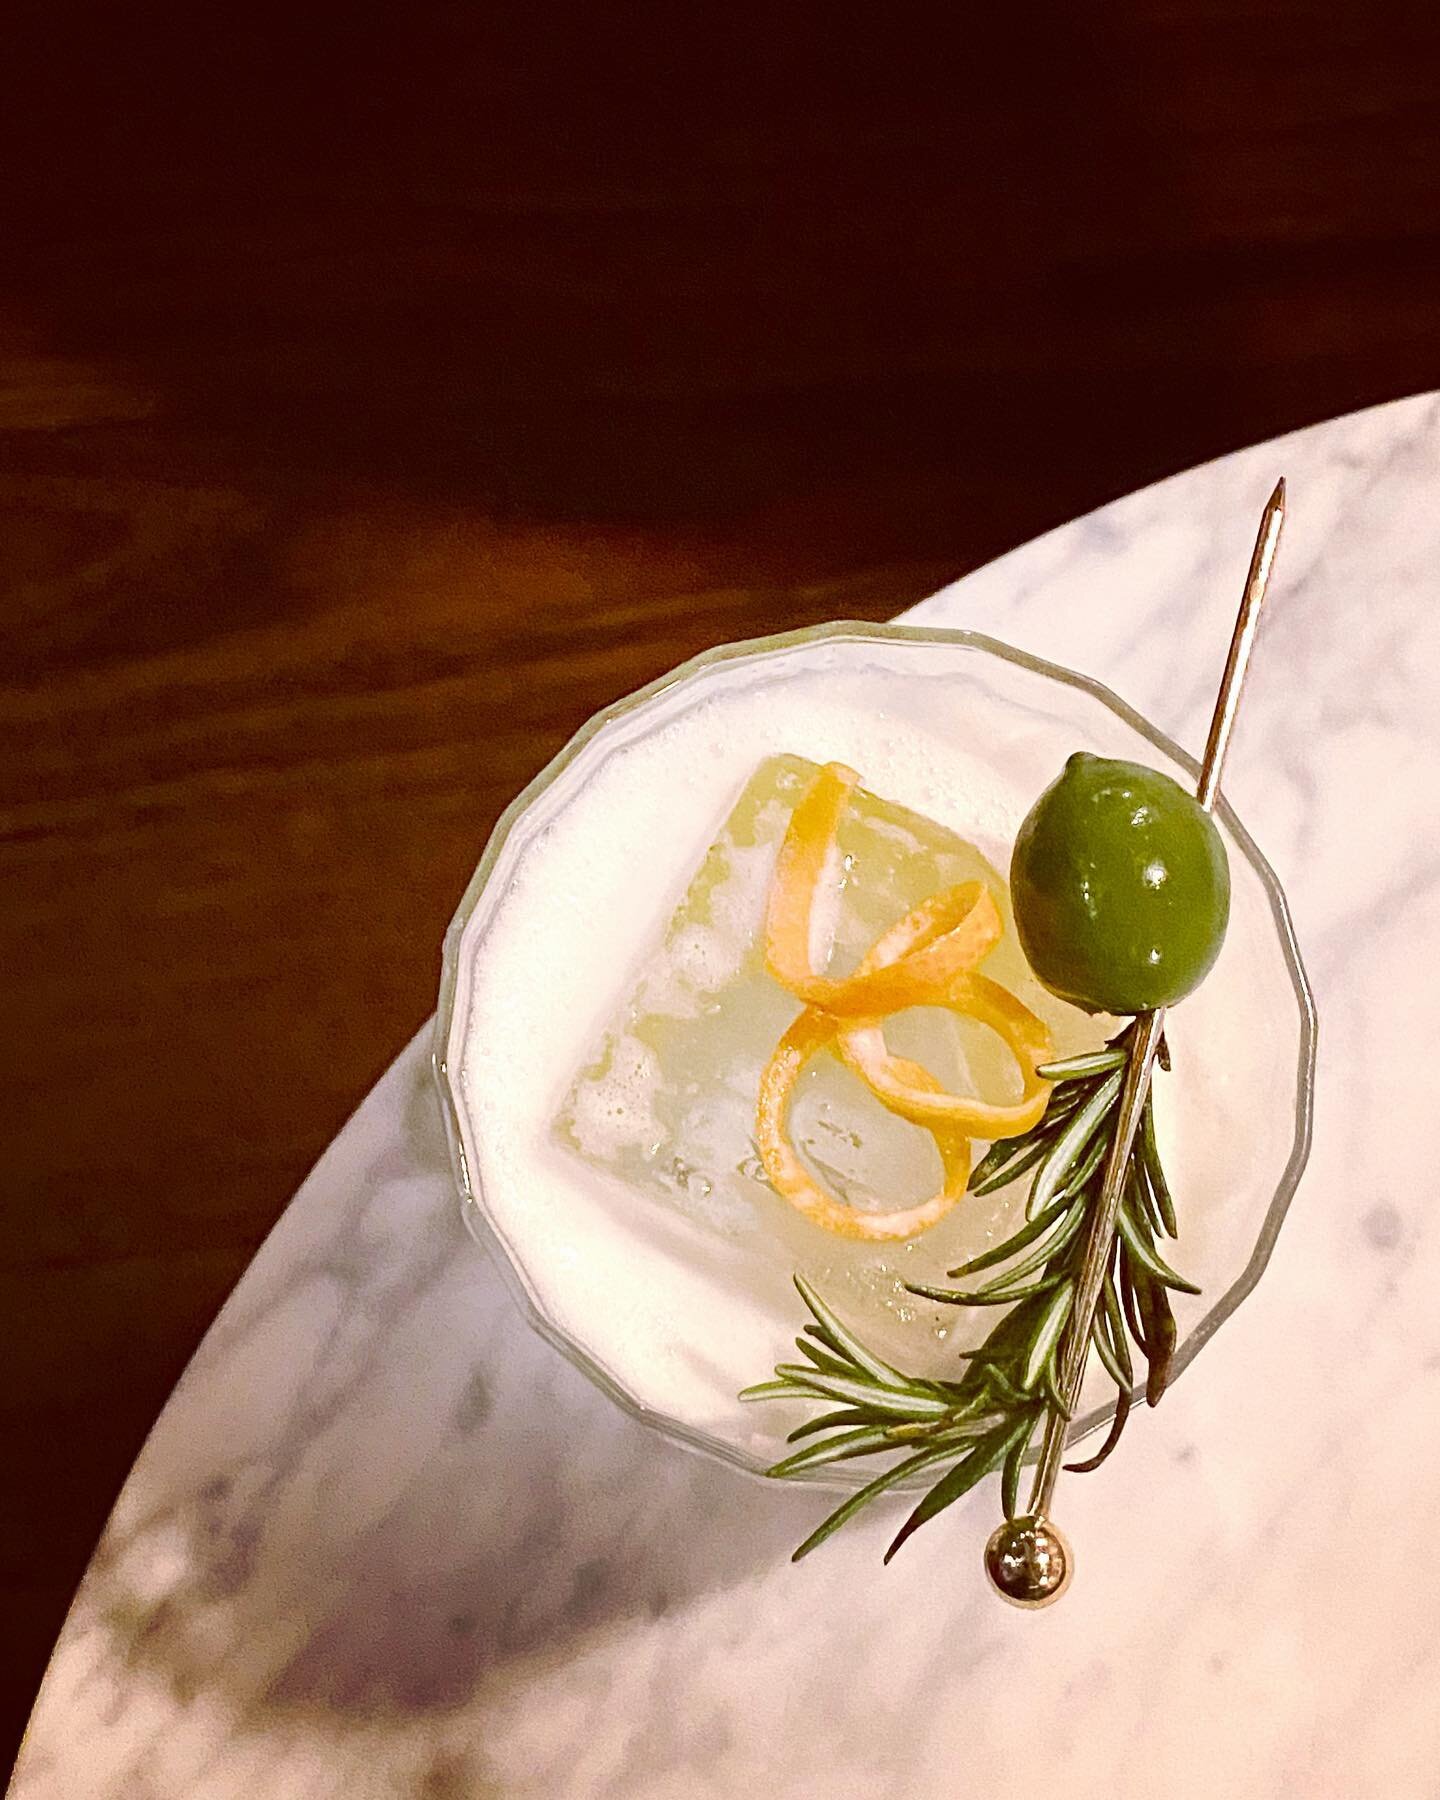 Coming soon! 🕊️
Our new signature cocktail &lsquo;Liquid Gold&rsquo; features our very own Sofia extra virgin olive oil! 

Sofia&rsquo;s talented mixologist has curated a blend that stays true to the the scent and aromatic element of the oil, creati